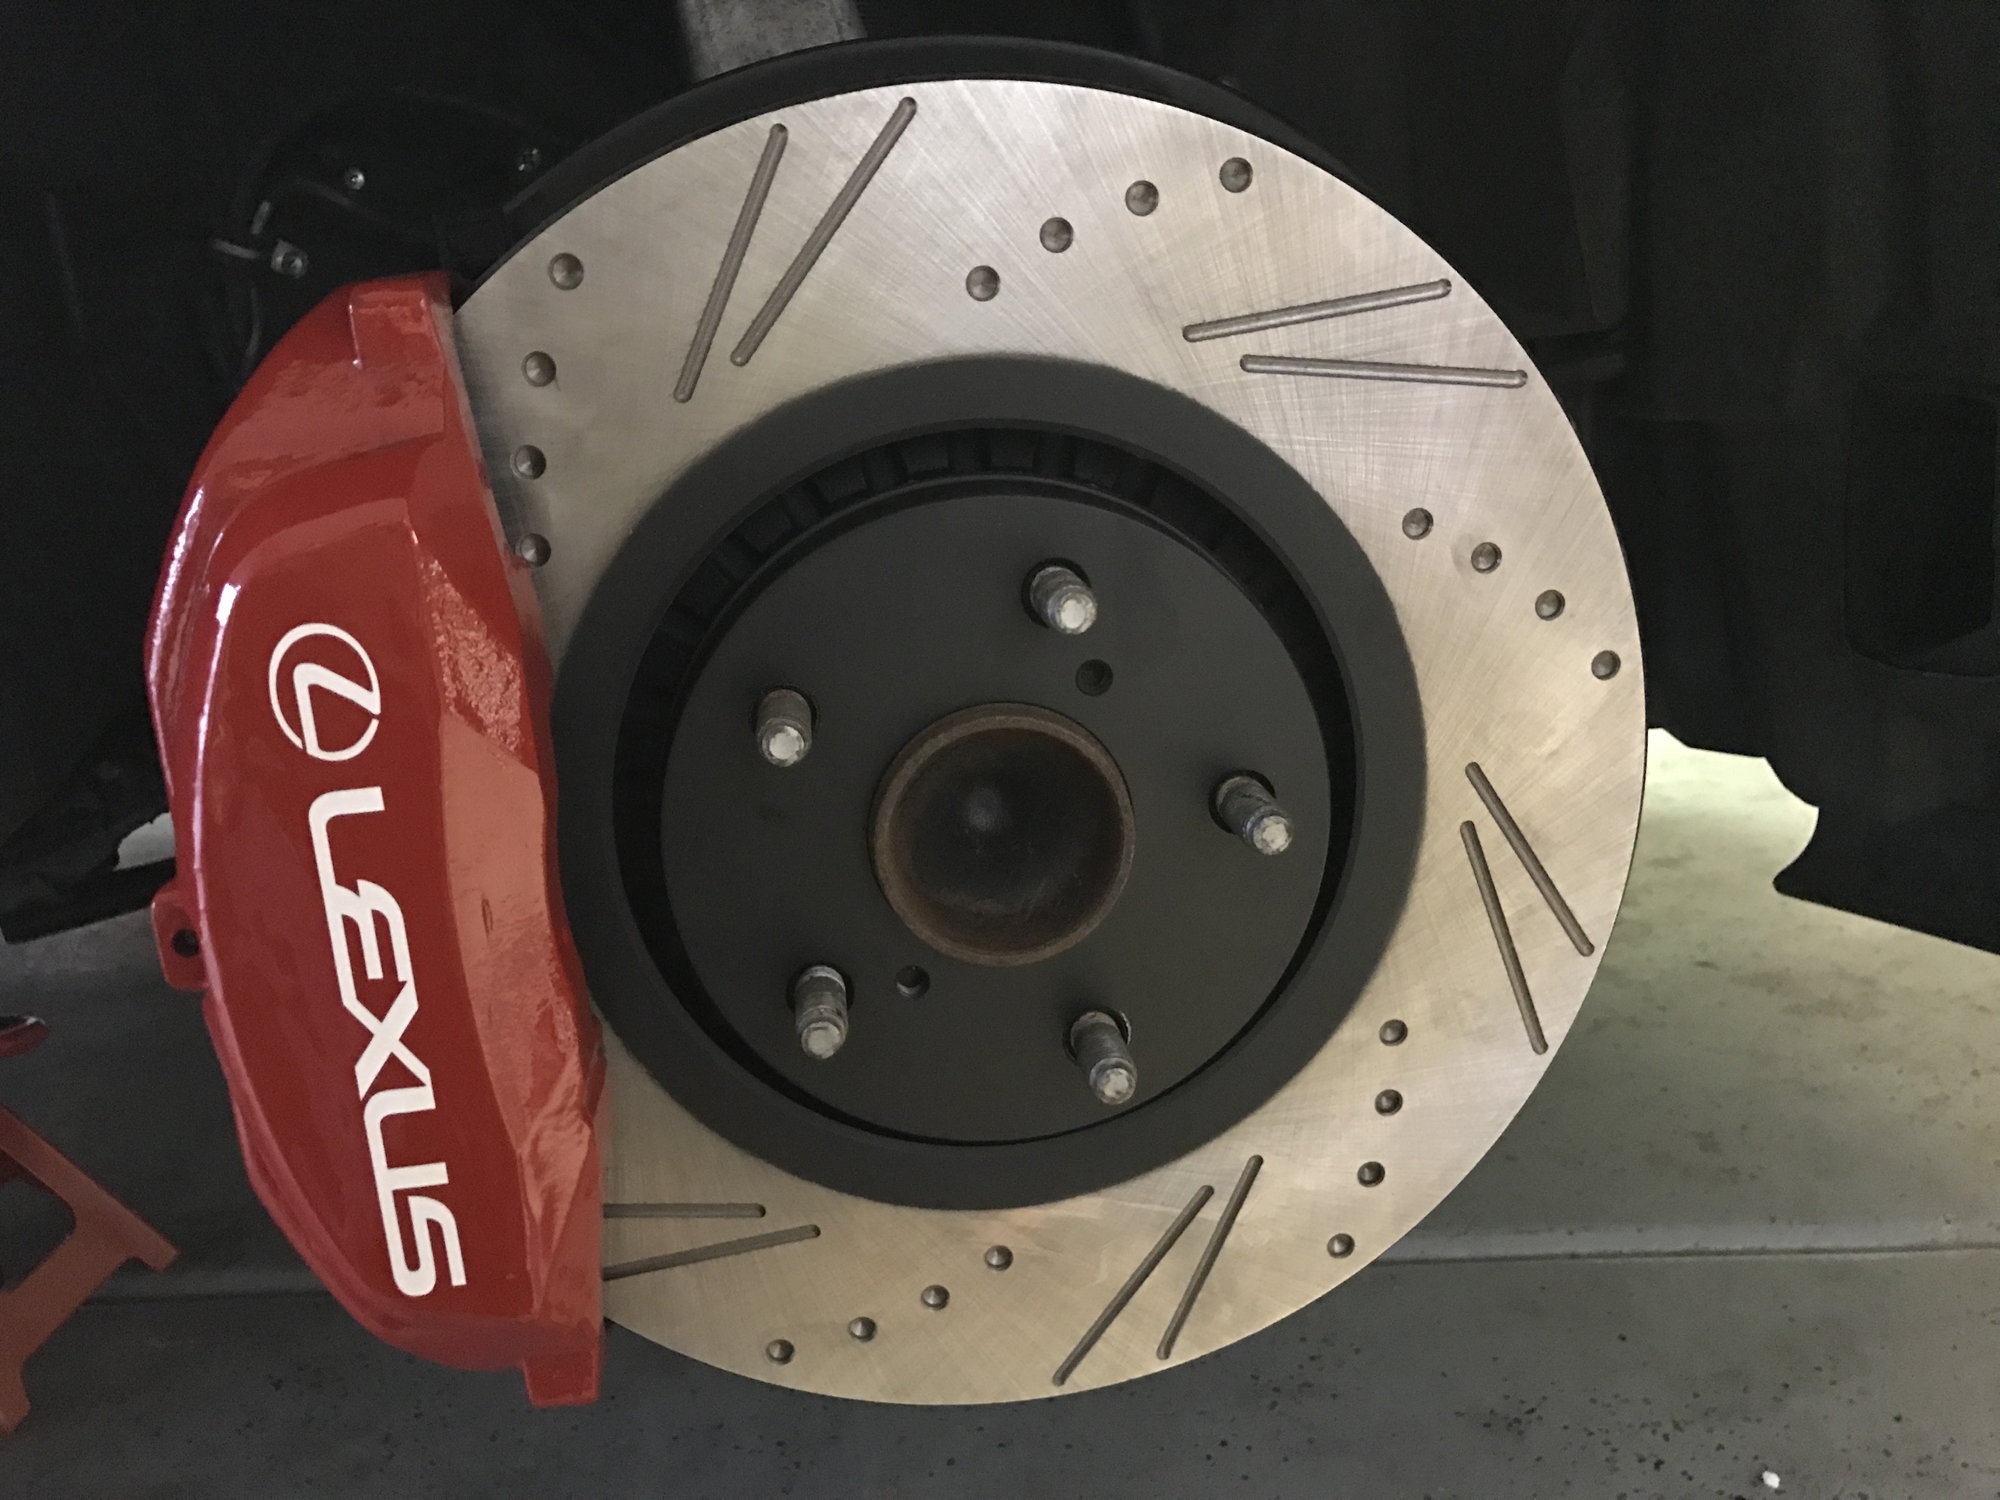 LEX035S GS350 IS350 AWD 2007-2018 Brake Rotors Drill /& Dimple Slots